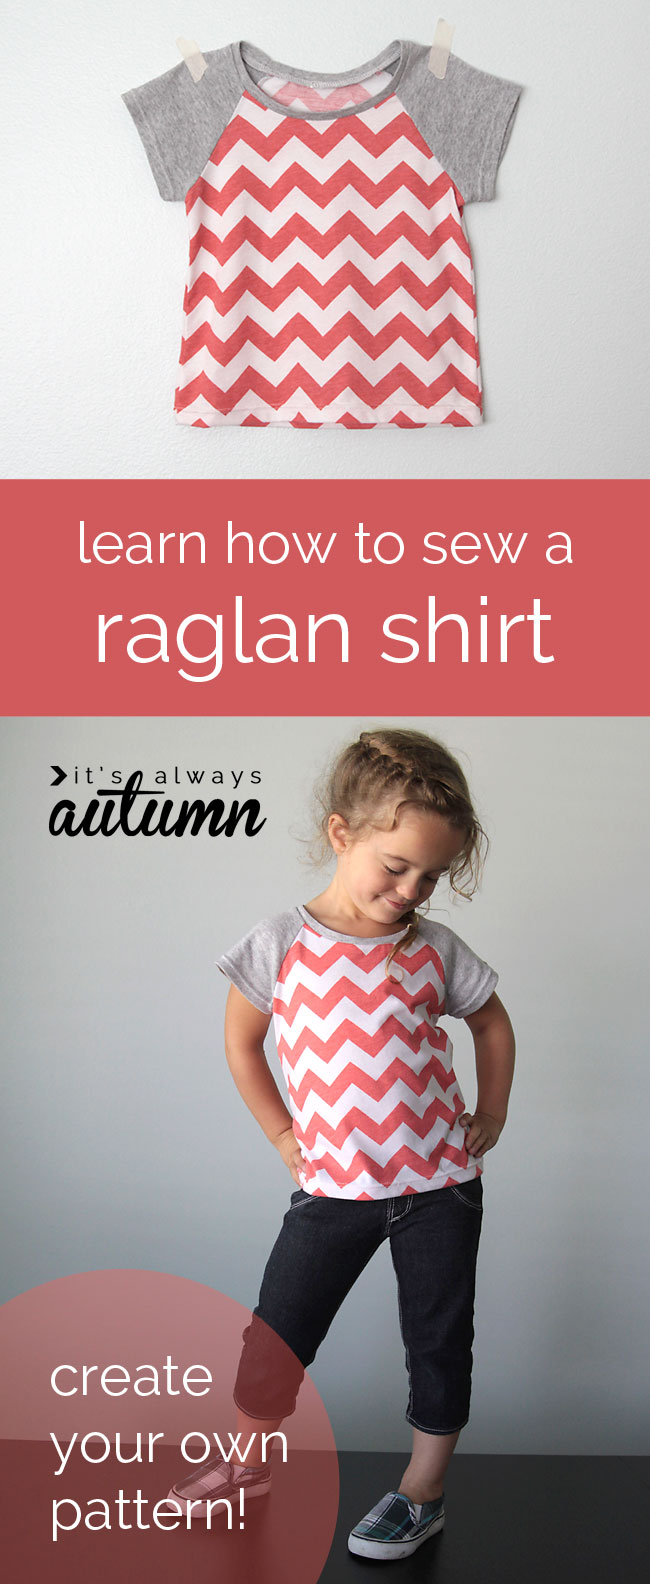 learn how to draft a pattern for a raglan shirt, then how to sew it up - it's easy!